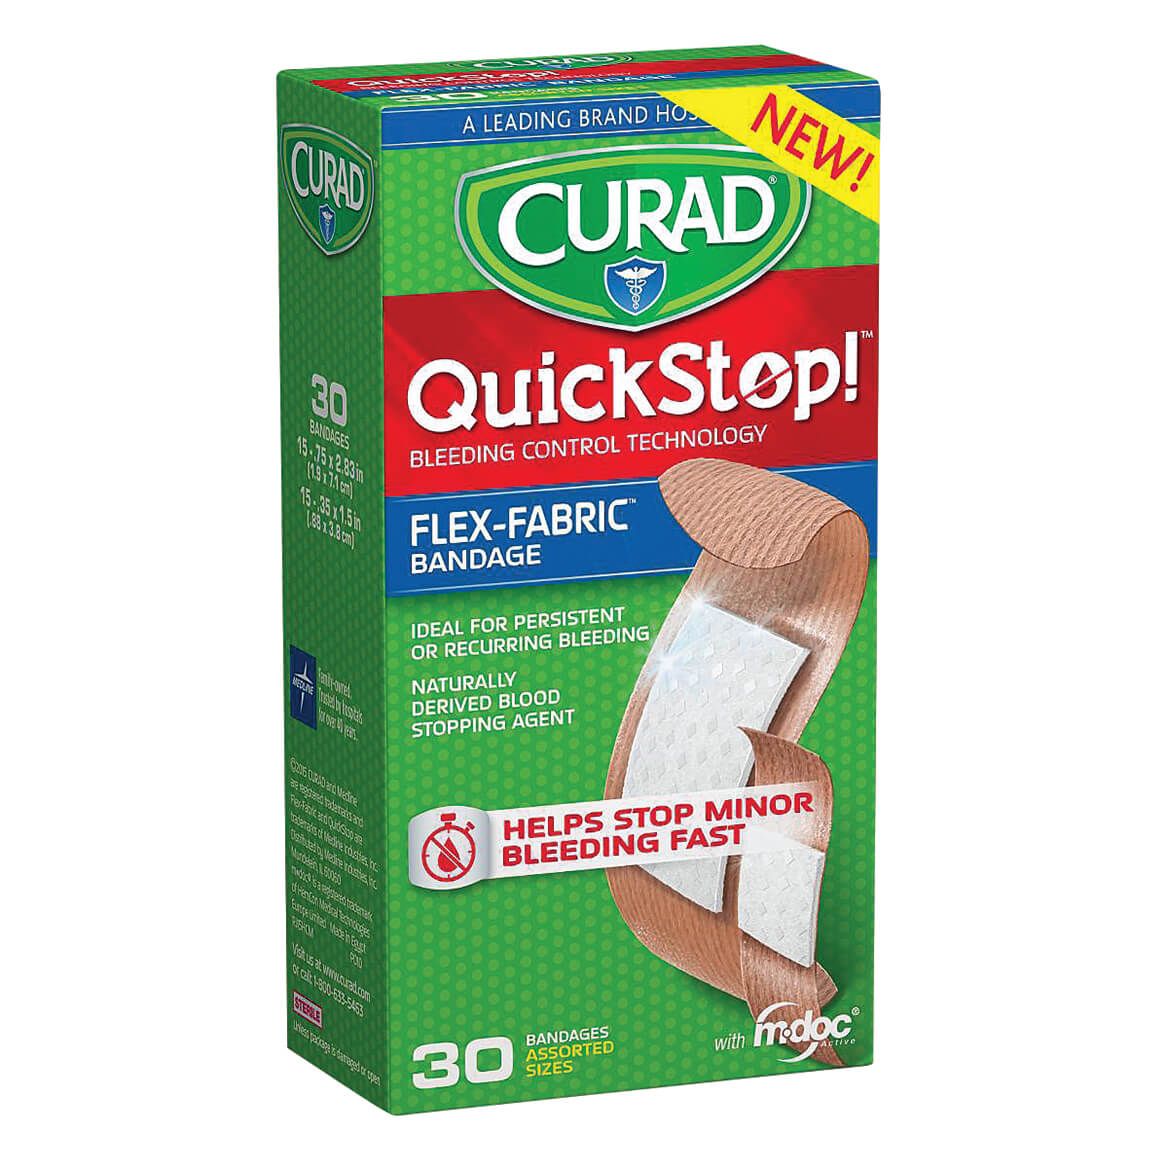 Curad QuickStop! Bandages Assorted Sizes, 30 count - Easy Comforts